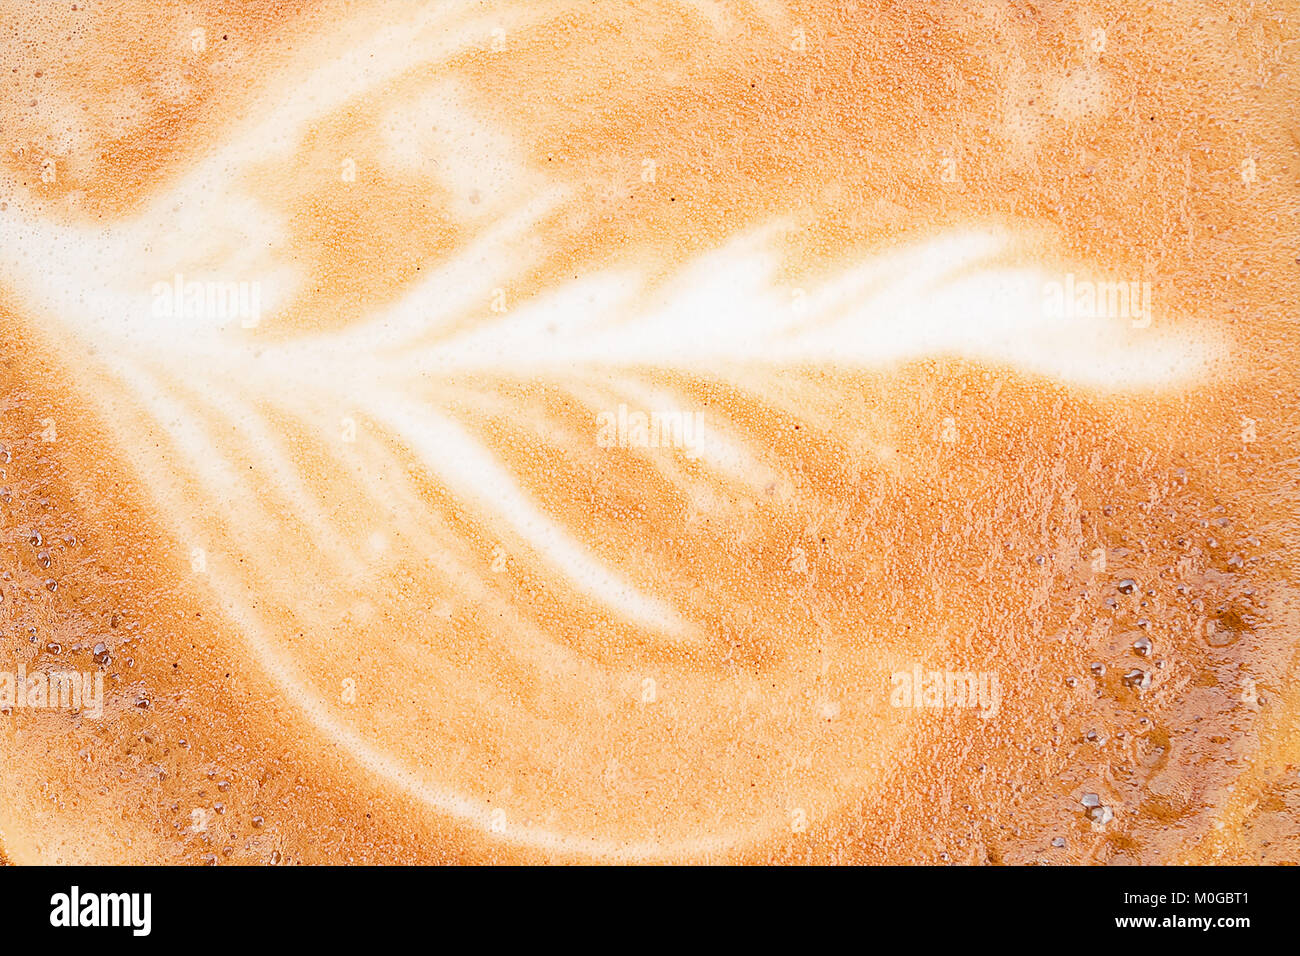 Close up of coffee latte art for background or coffee cafe menu design Stock Photo